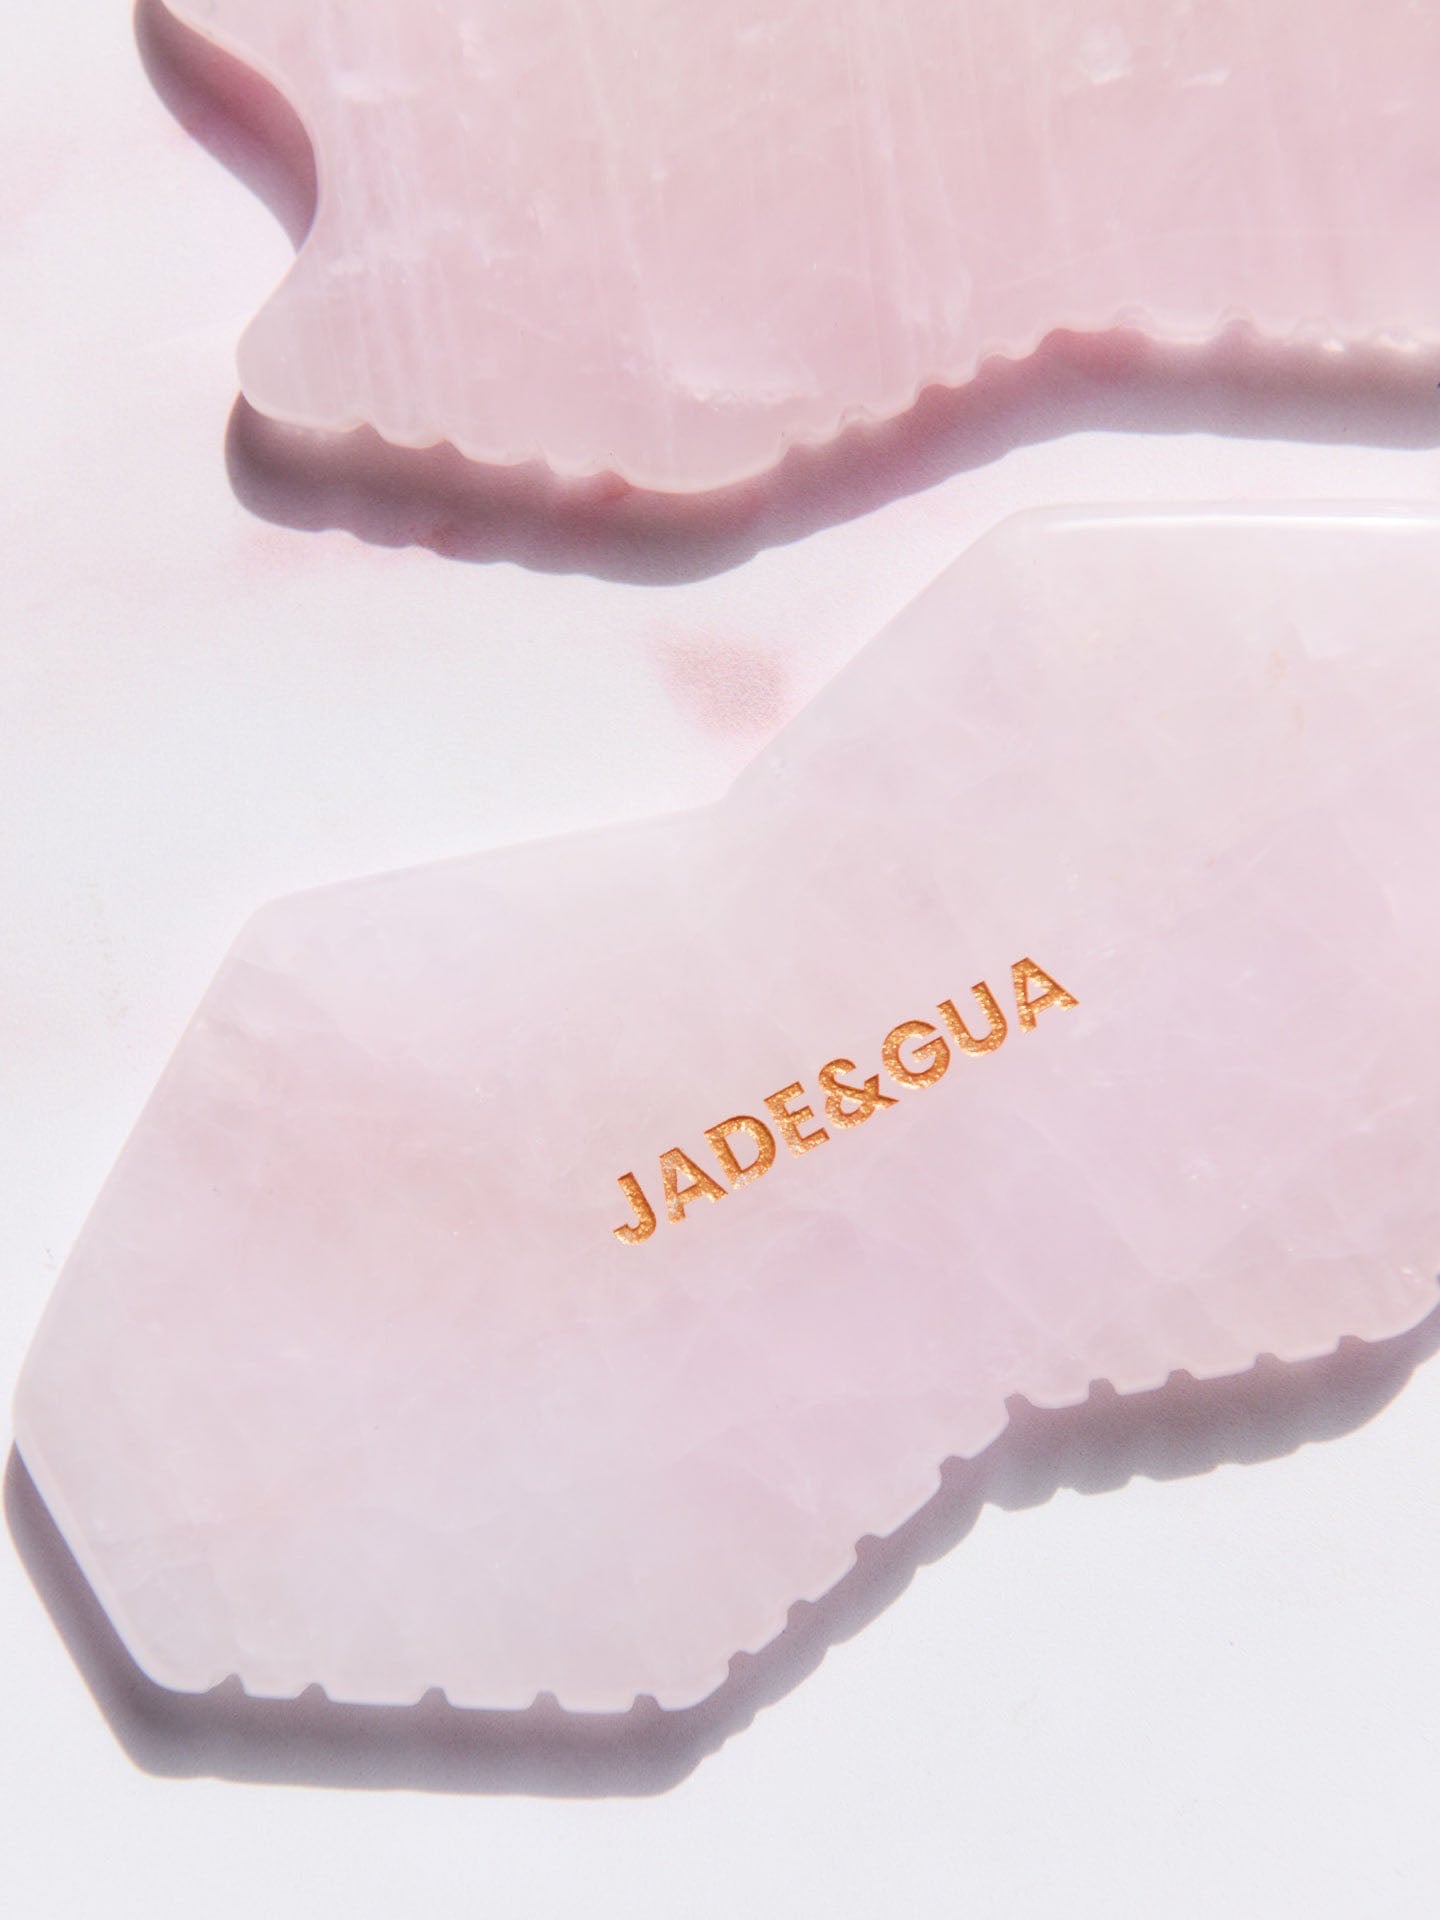  Multi Side Rose Quartz Comb by Jade and Gua Jade and Gua Perfumarie